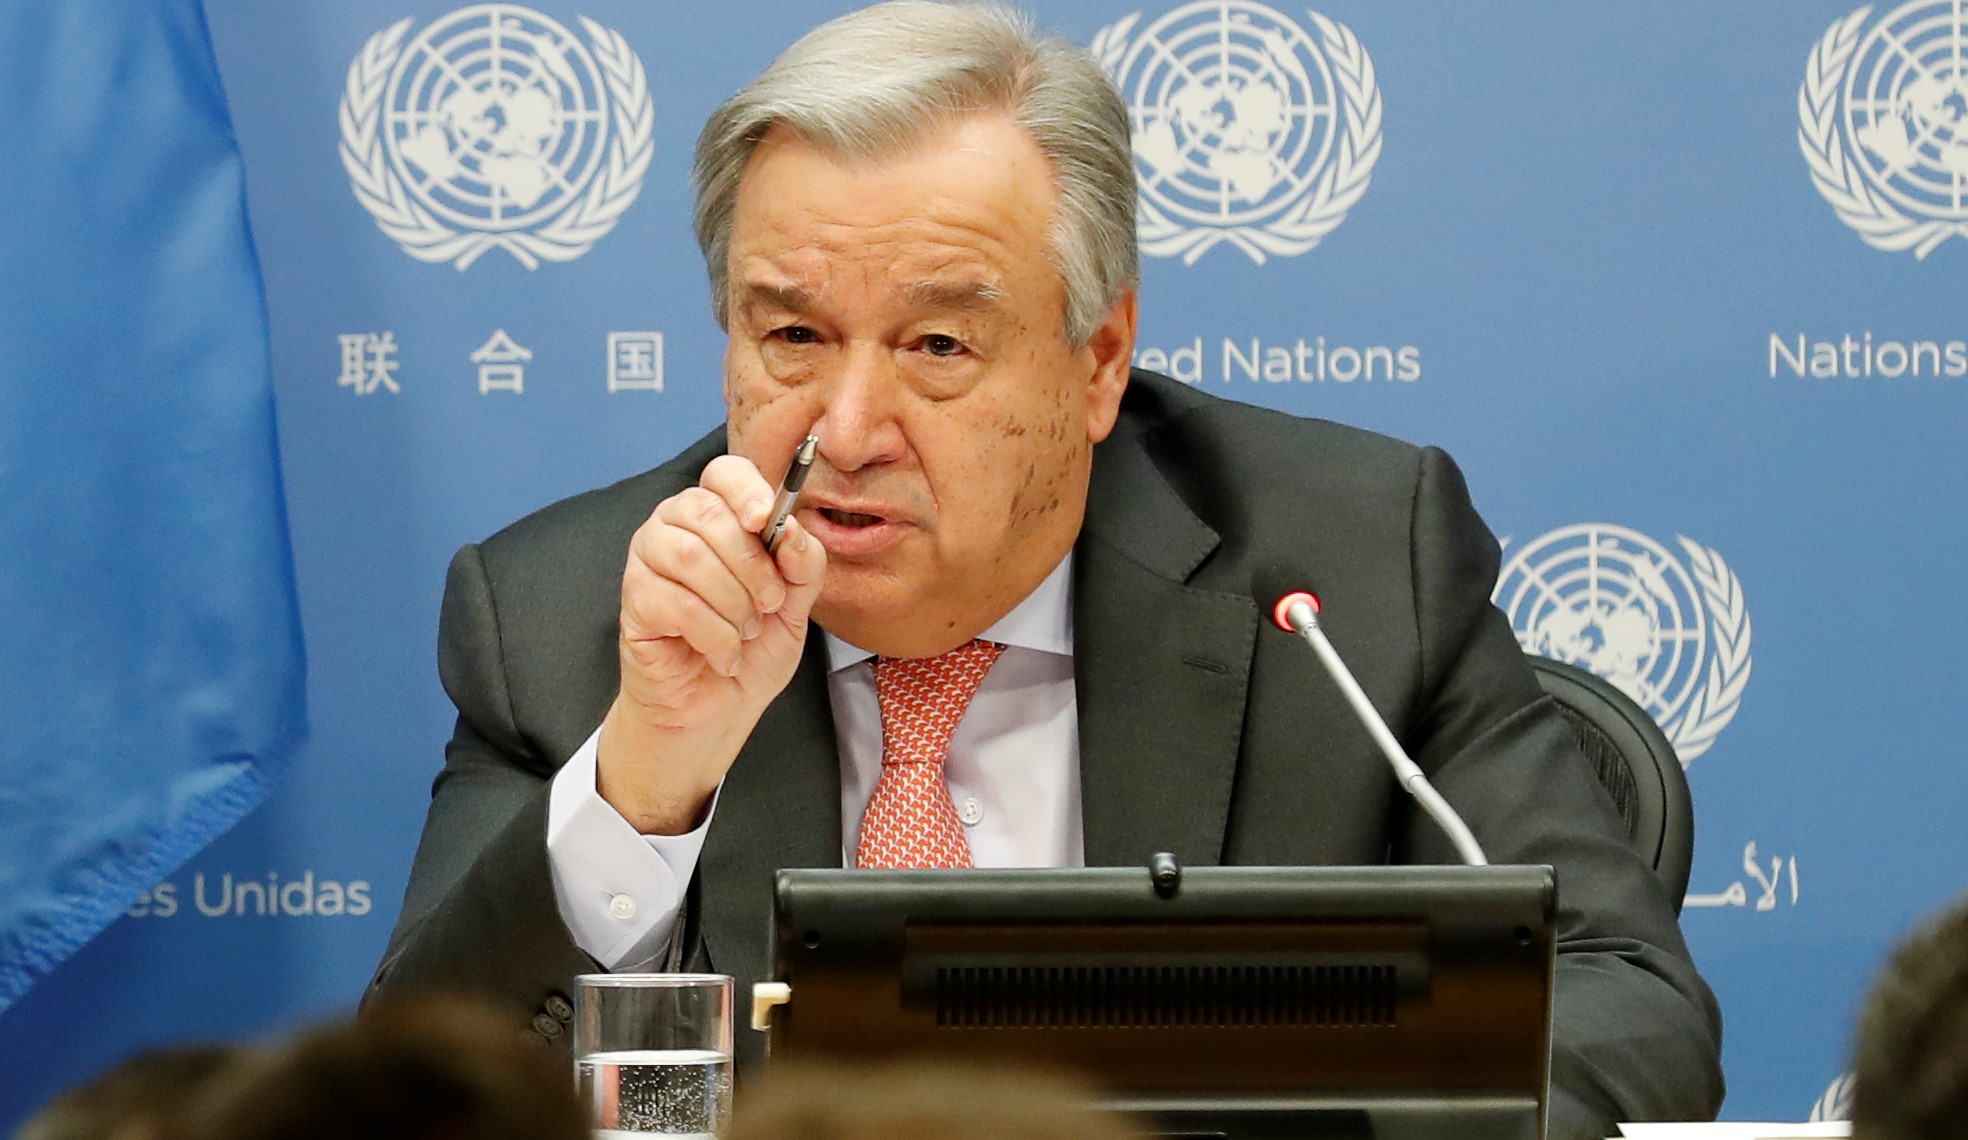 U.N. chief condemns tanker attacks, says facts must be established